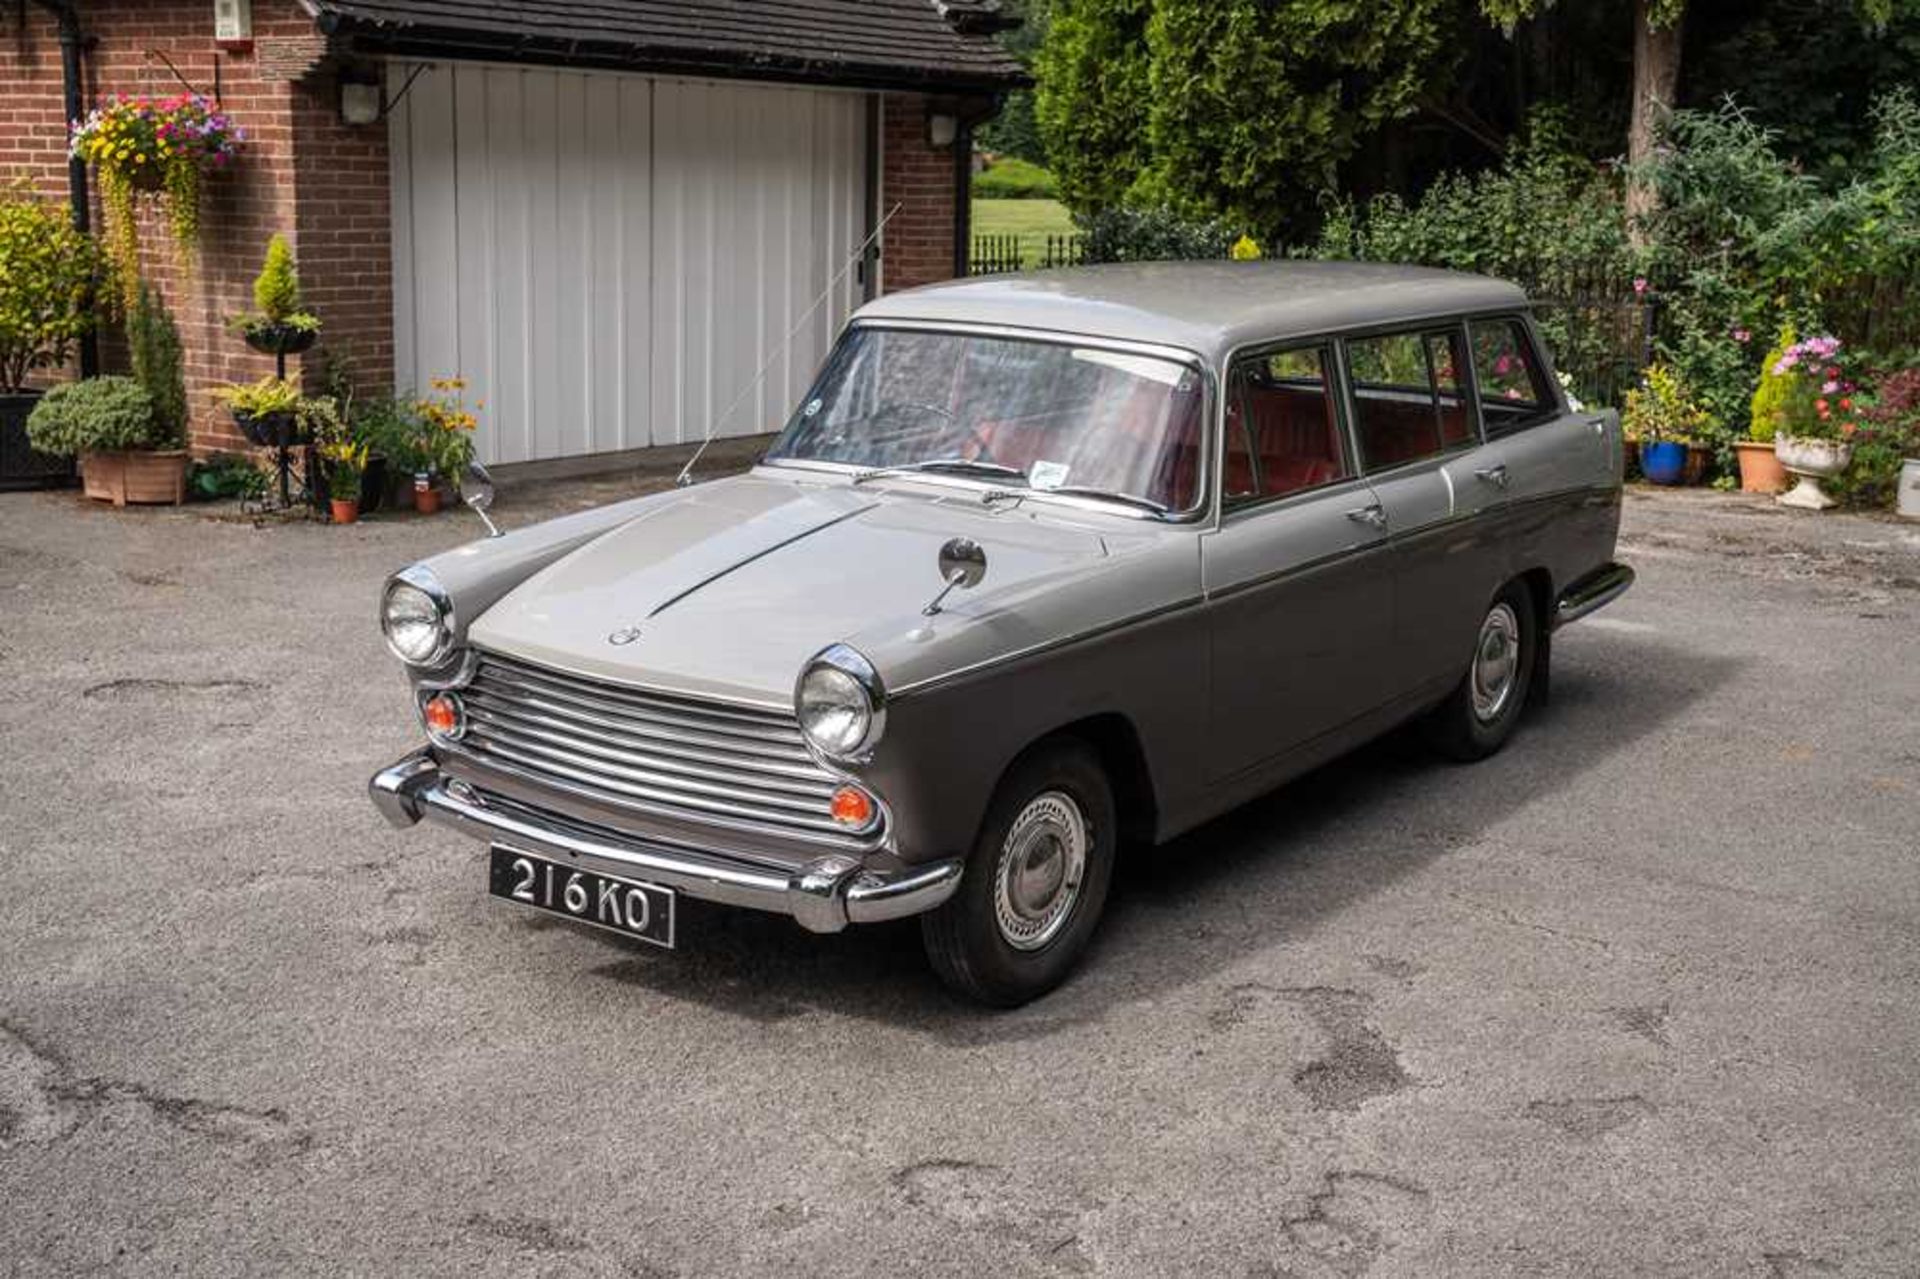 1964 Morris Oxford Series VI Farina Traveller Just 7,000 miles from new - Image 7 of 98